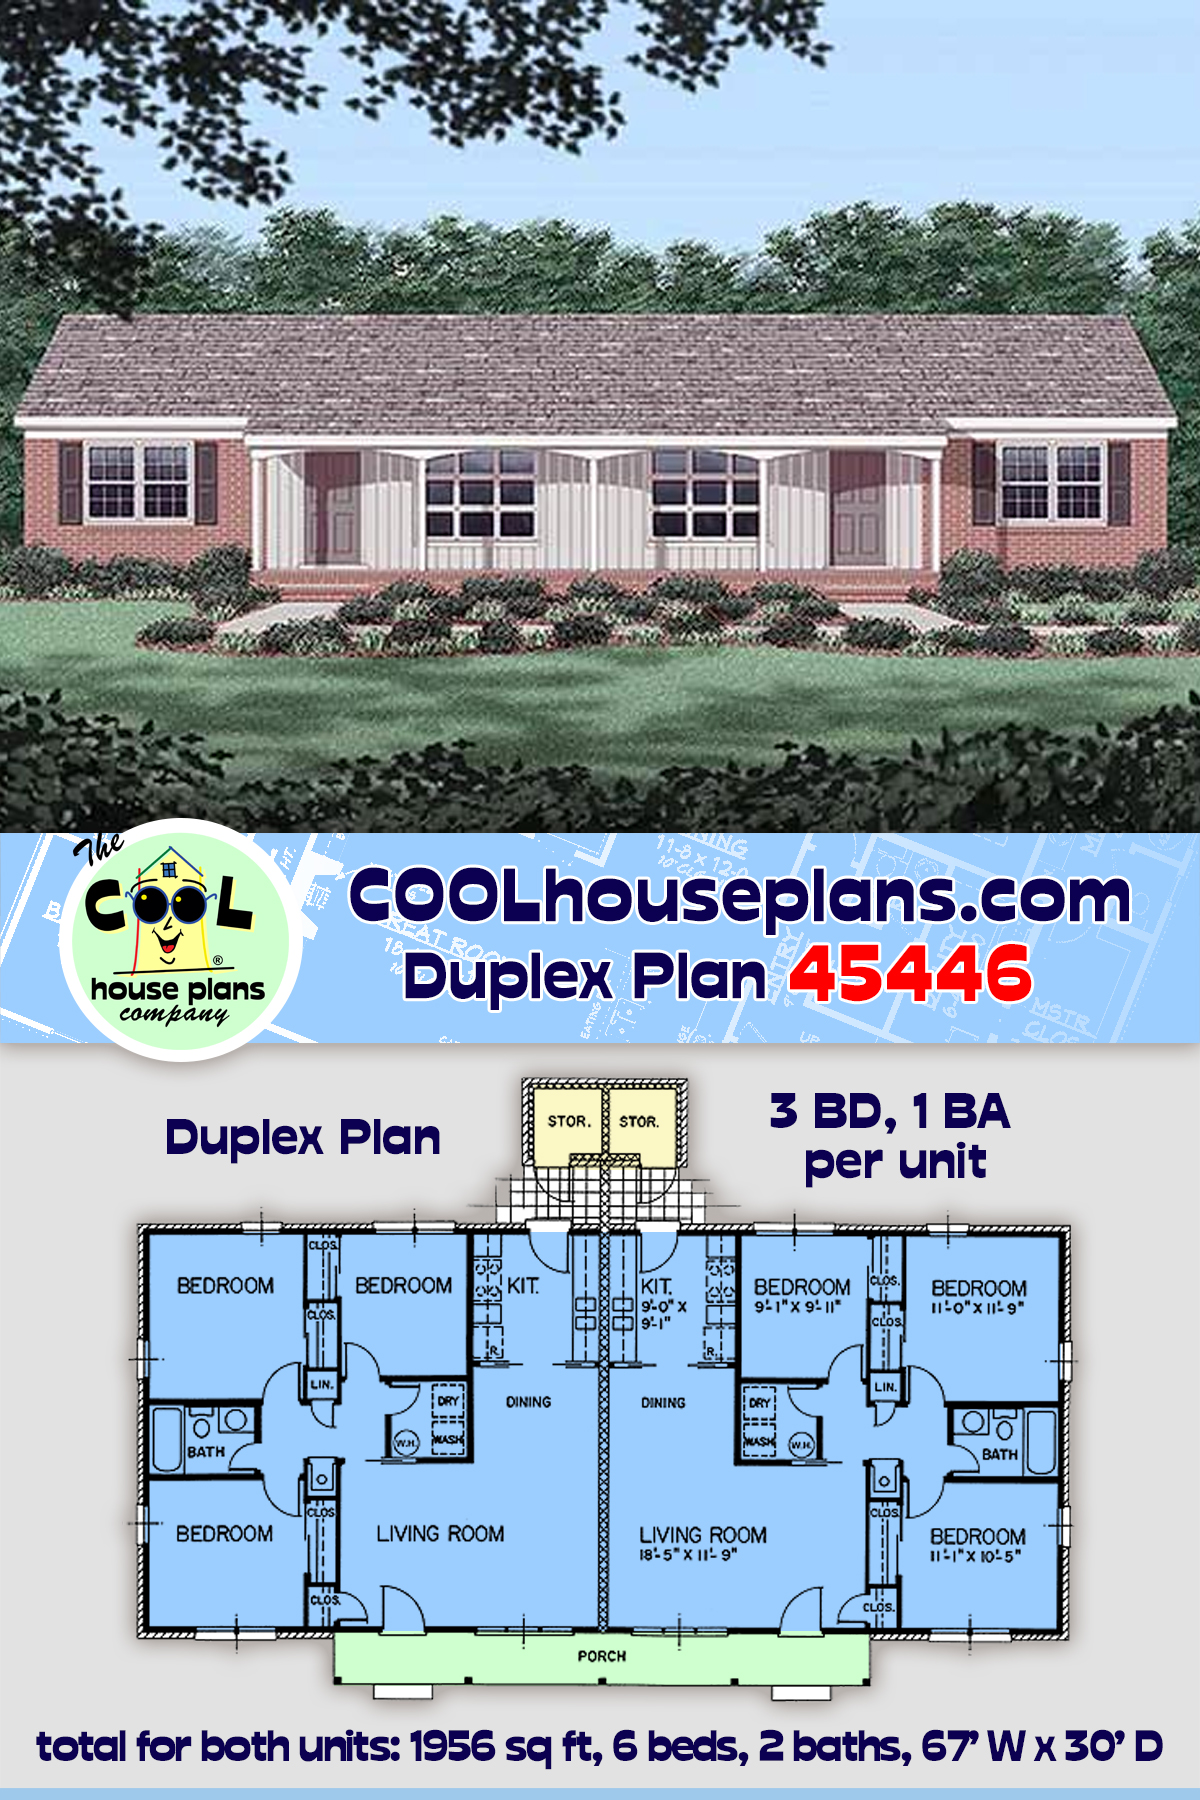 One-Story Multi-Family Plan 45446 with 6 Beds, 2 Baths